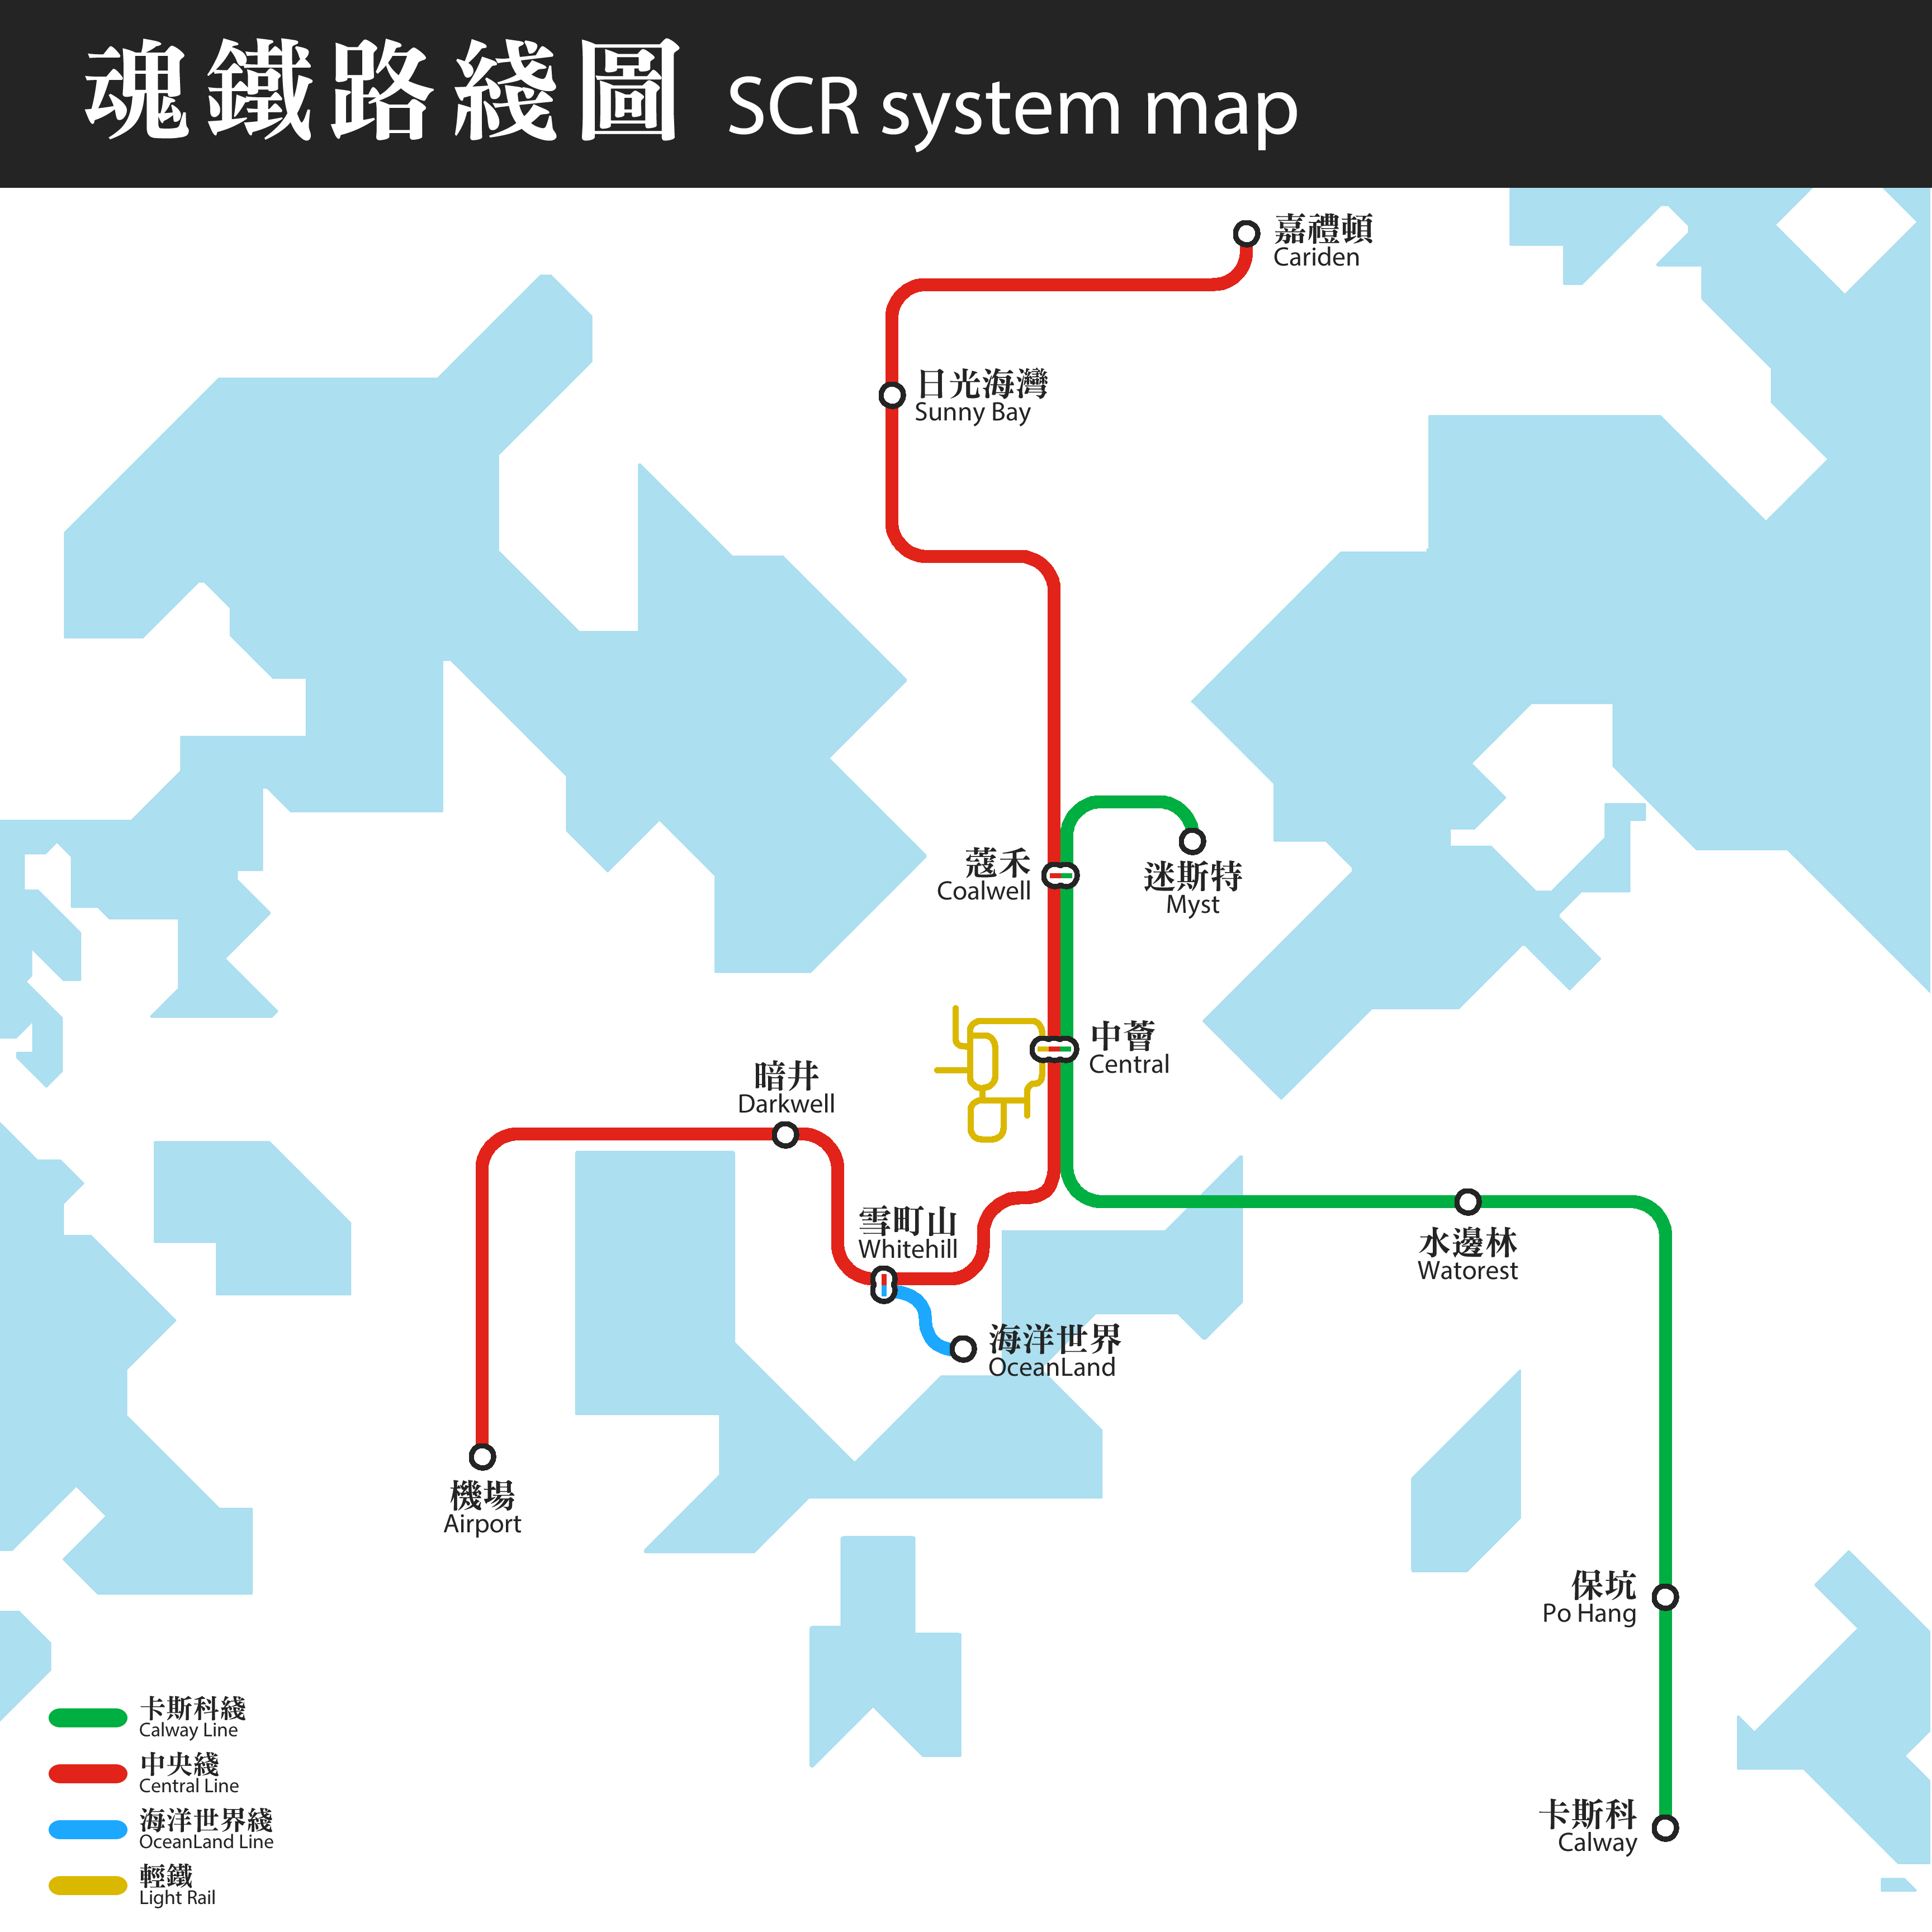 SCR system map